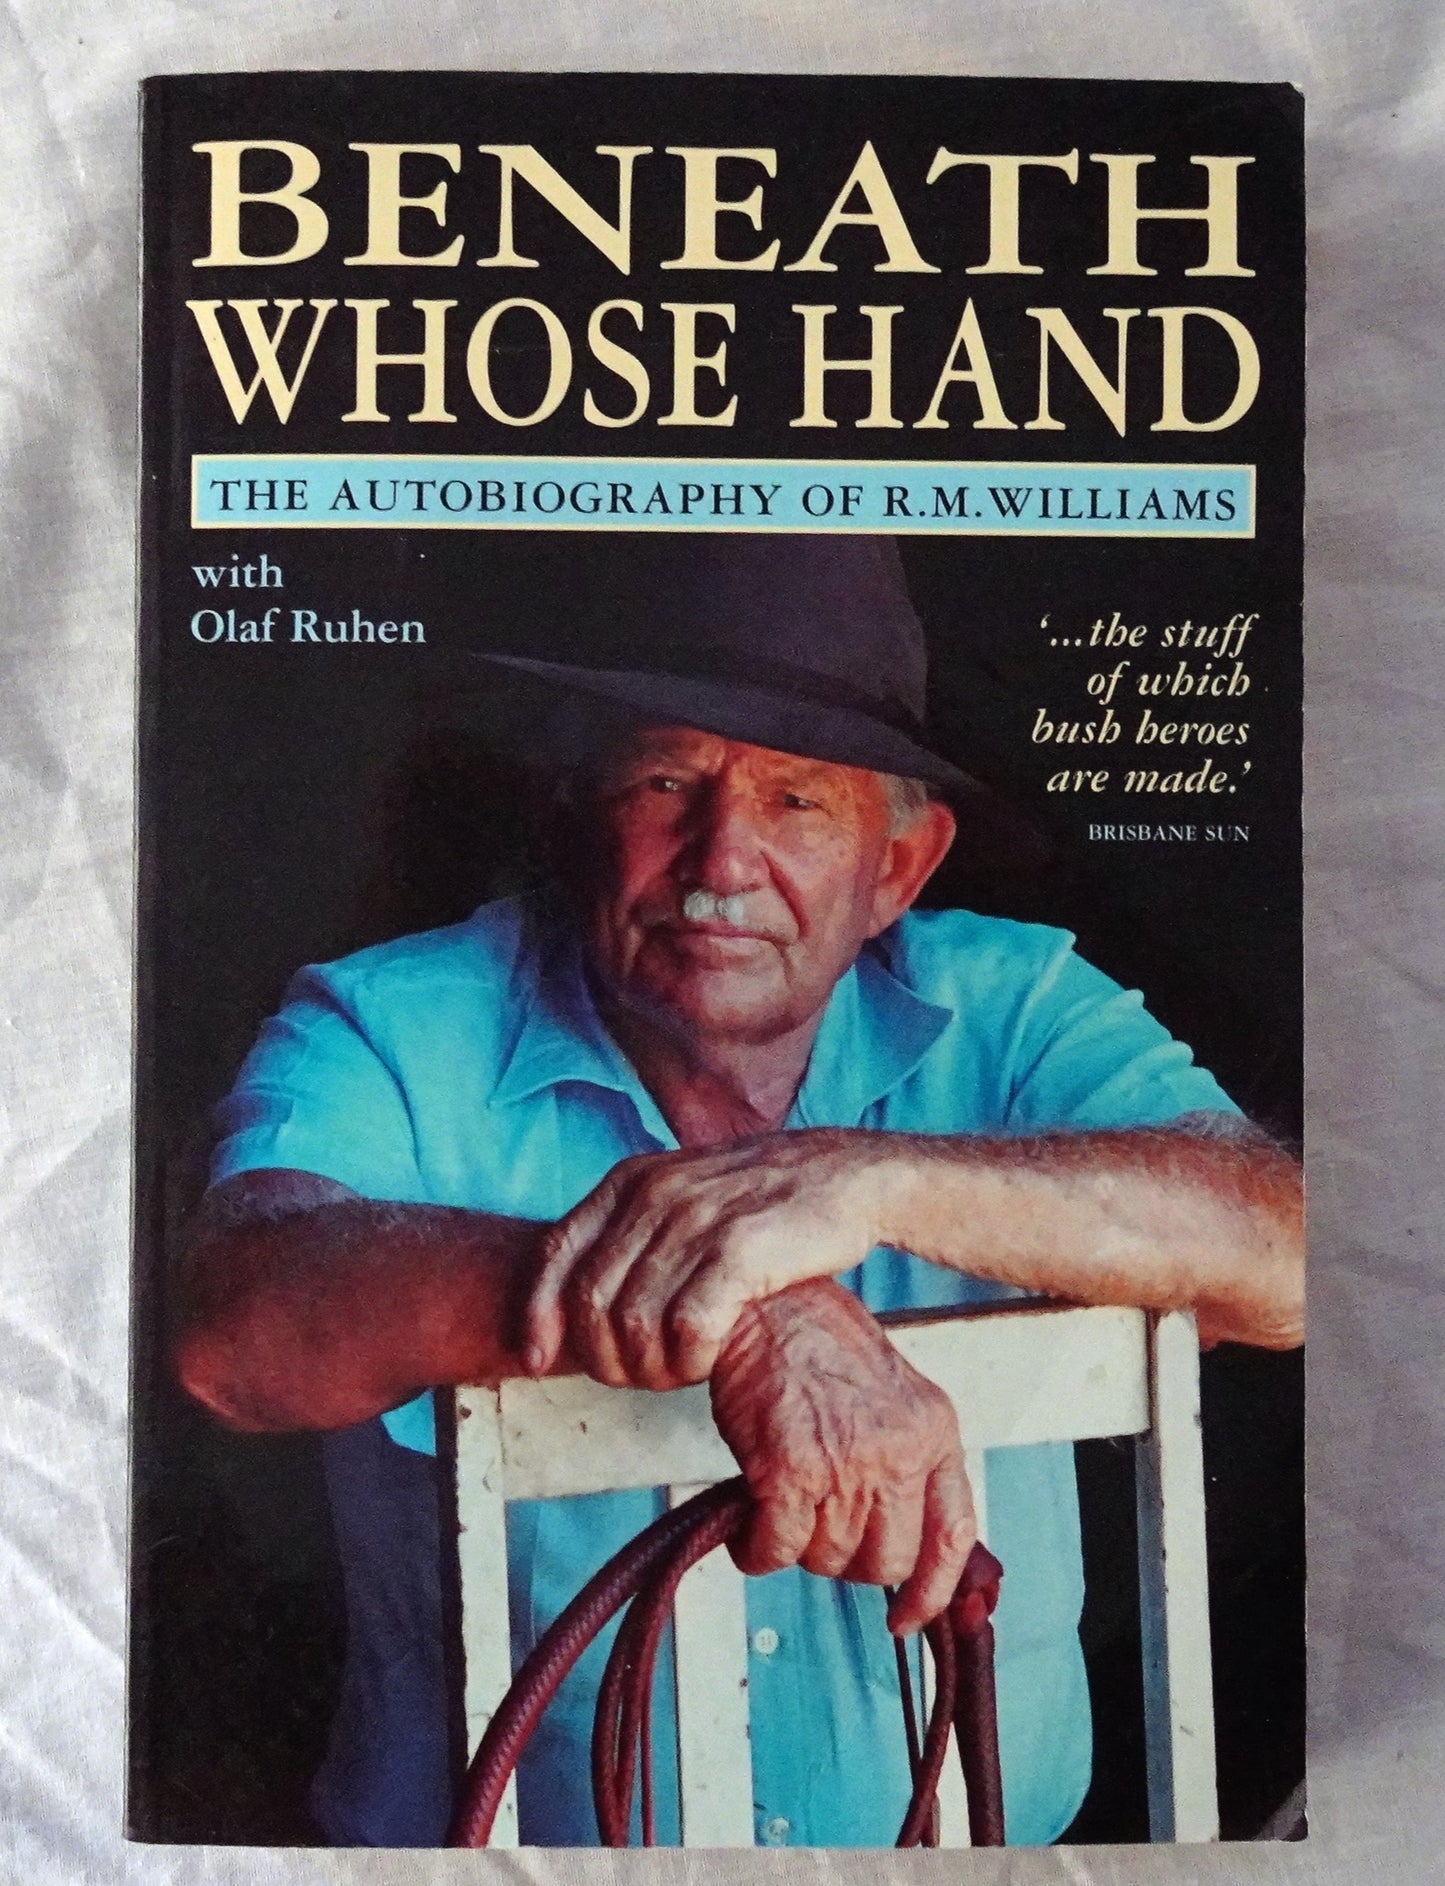 Beneath Whose Hand  The Autobiography of R. M. Williams  by R. M. Williams  with Olaf Ruhen